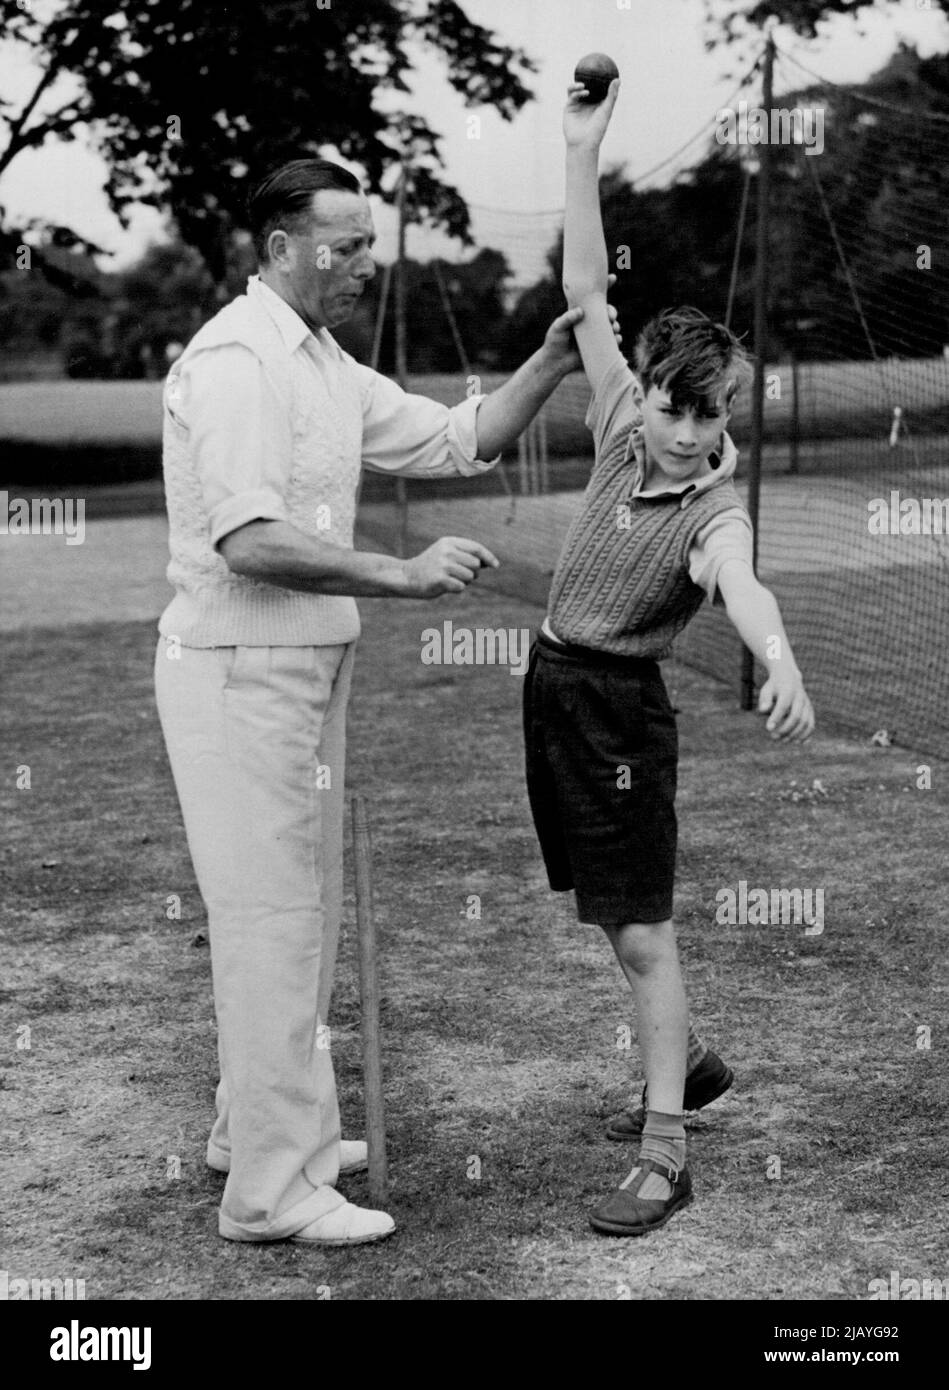 His Royal Pupil -- Mr. Ernie Webster, seen instructing his Royal pupil in the art of bowling, during one of 12-year-old Prince Williams regular Cricket lessons at Broadstairs. Ernie Webster, well-known in Kent as a cricket and soccer Coach, has a Prince among his pupils - William of Gloucester, With his younger brother, Prince Richard, the 12-year-old son of the Duke and Duchess of Gloucester, is being educated at Wellesley House School, Broadstairs and every week he is among the private pupils of Mr. Webster, a former Lenos and British Empire Cricketer. June 10, 1954. (Photo by Fox Photos). Stock Photo